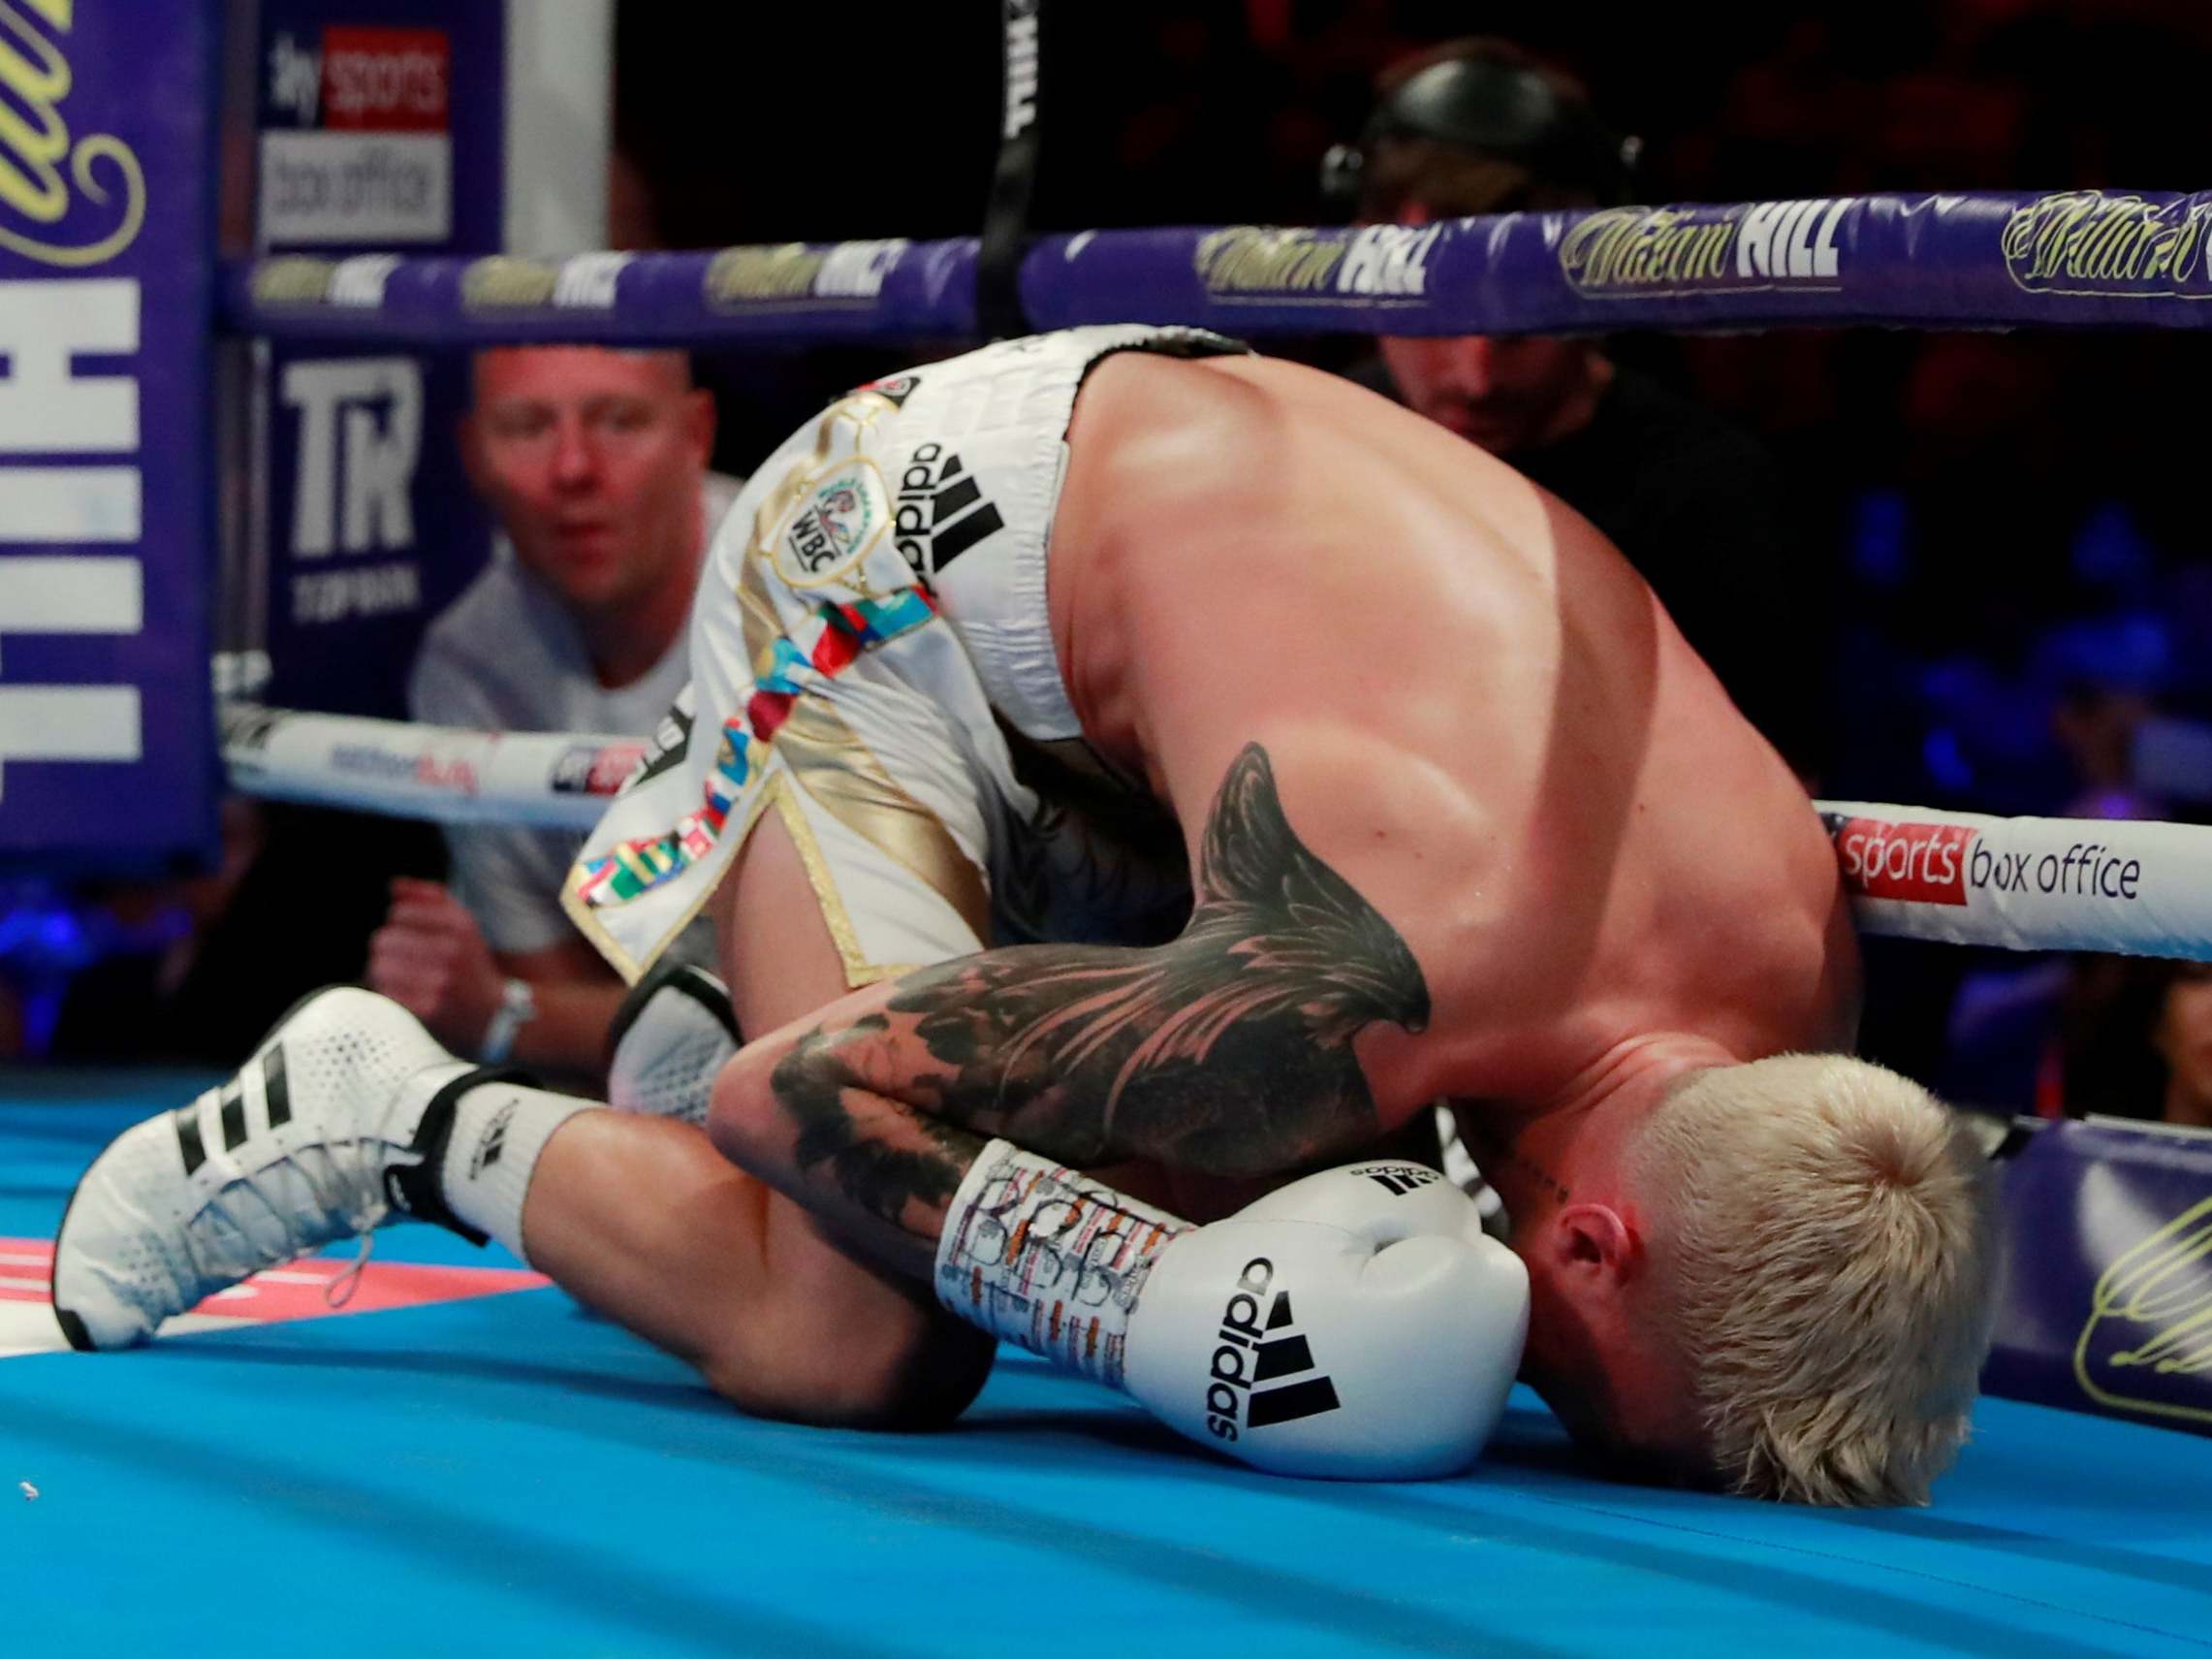 Charlie Edwards had his knockout defeat overturned after being hit on the canvas